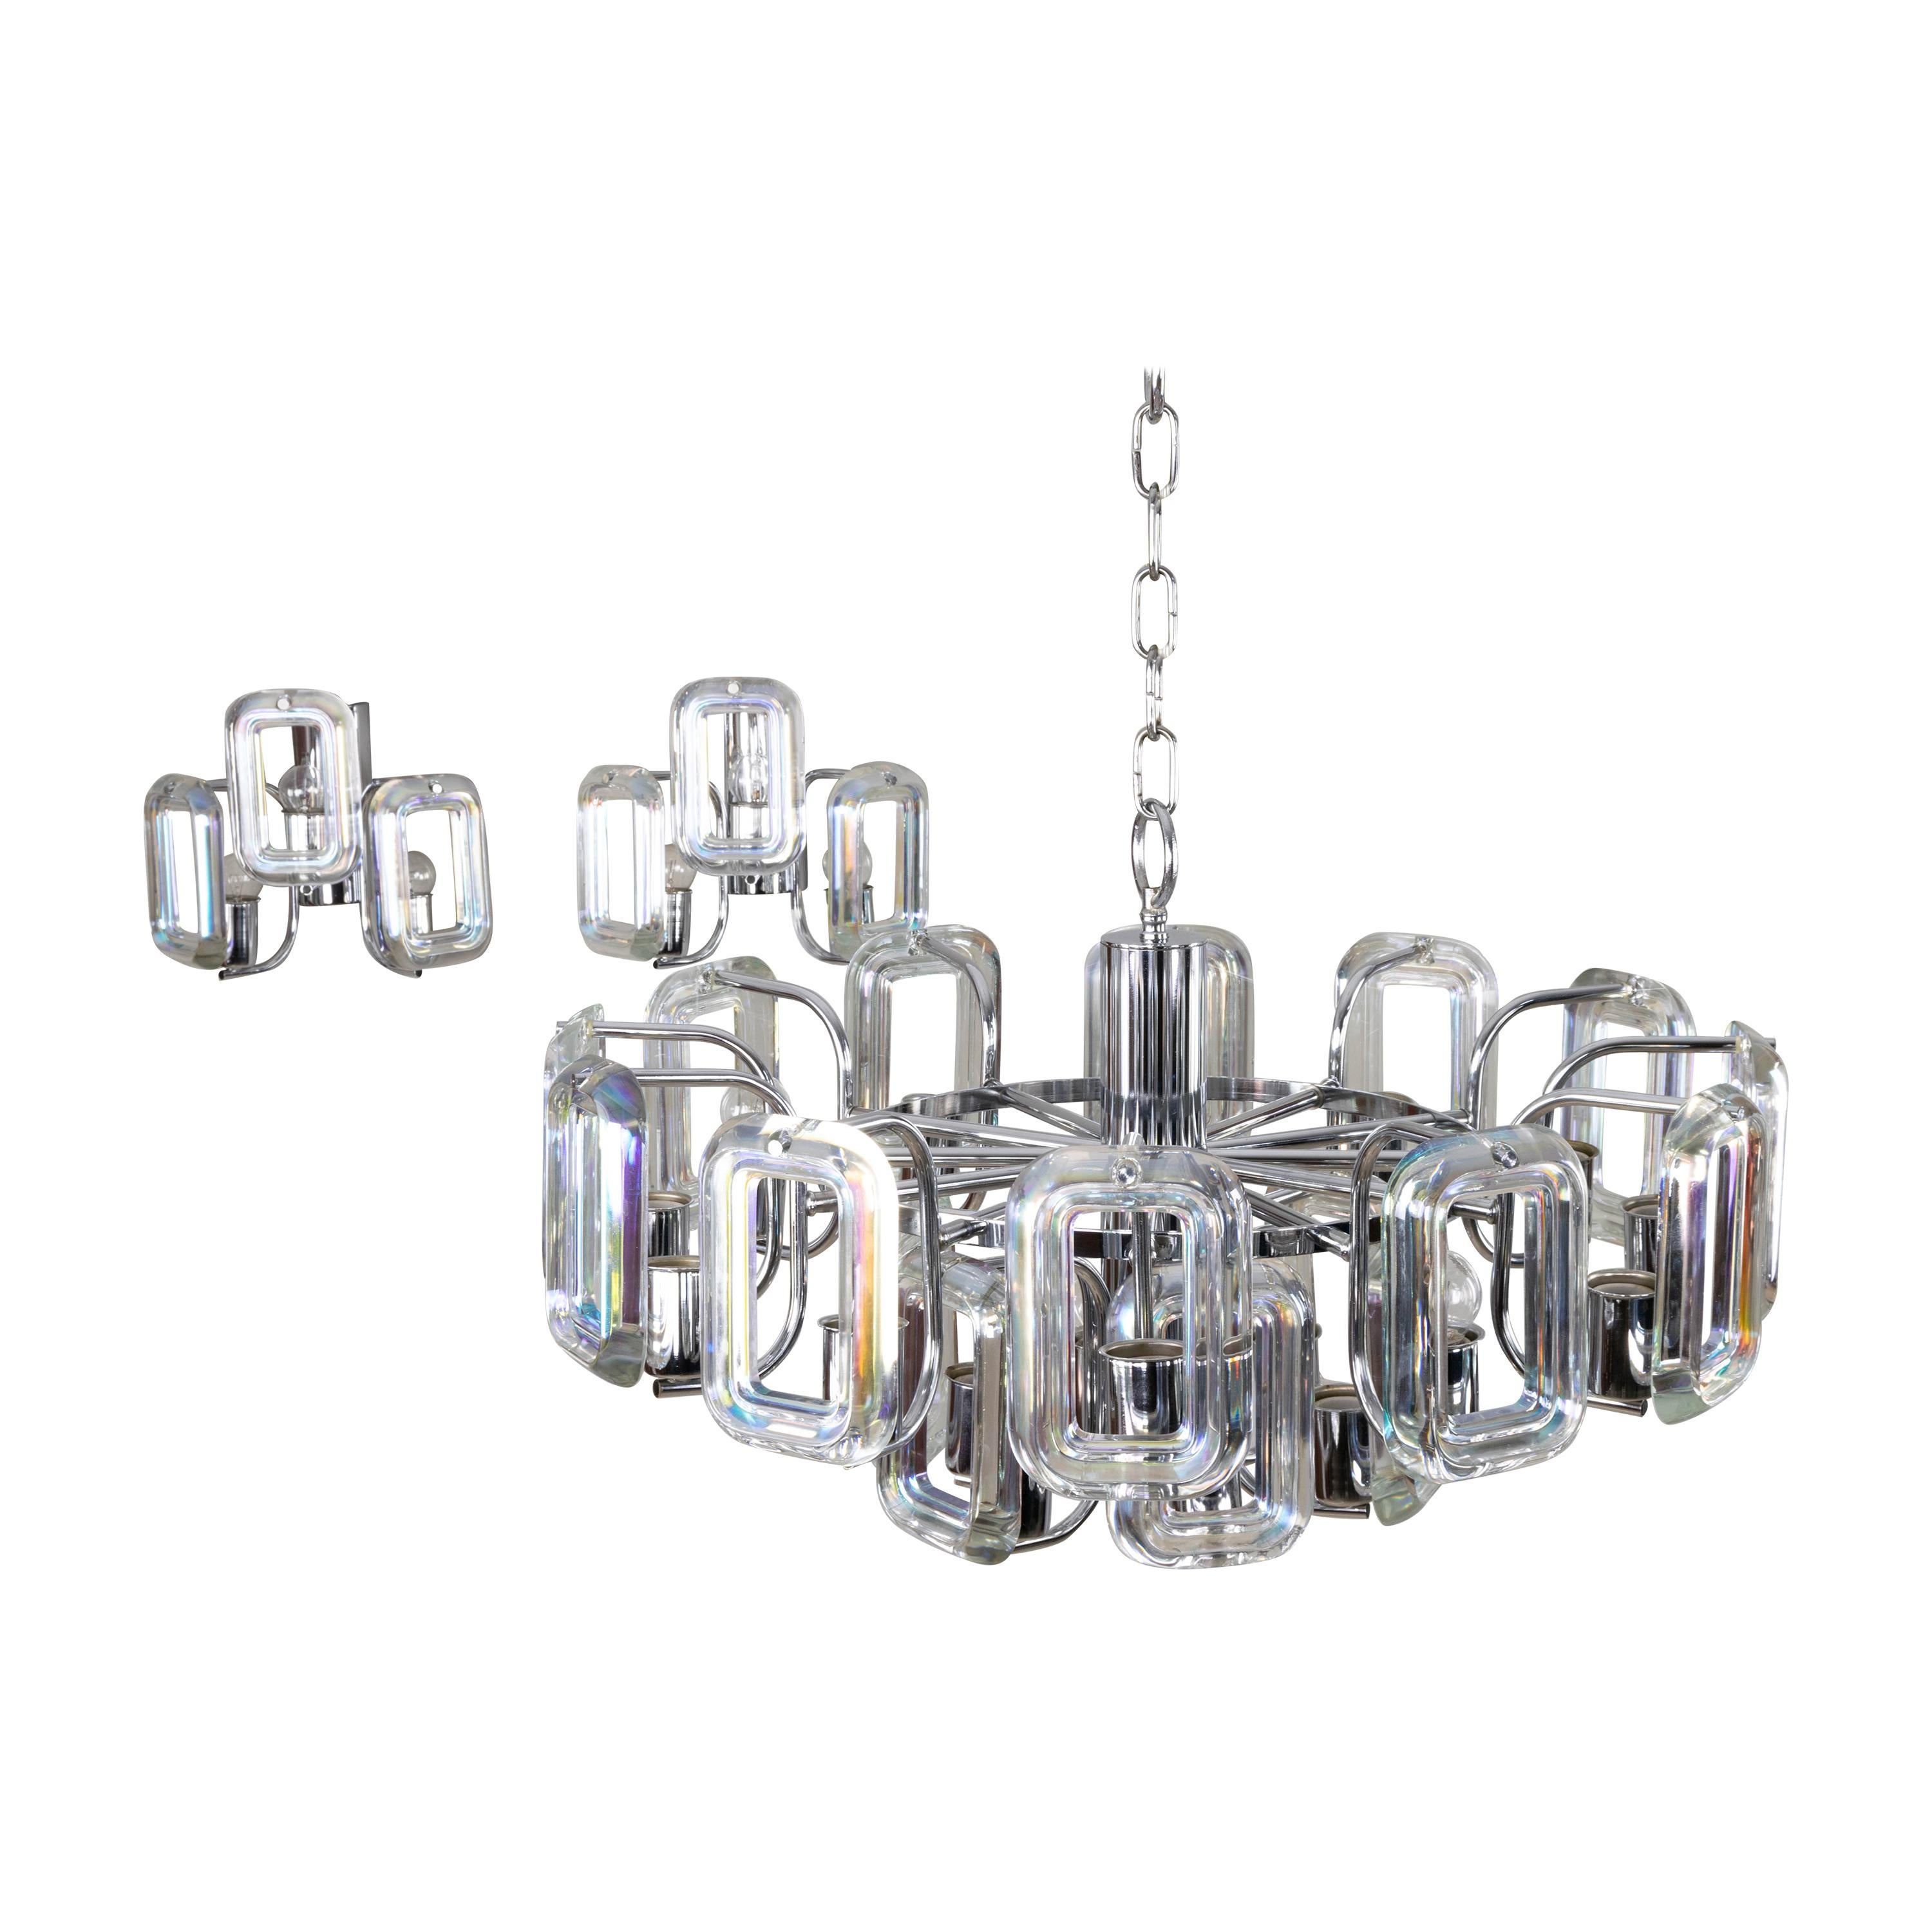 Large Set of Chandelier and Sconces of Italian Modern Iridescent Glass Links